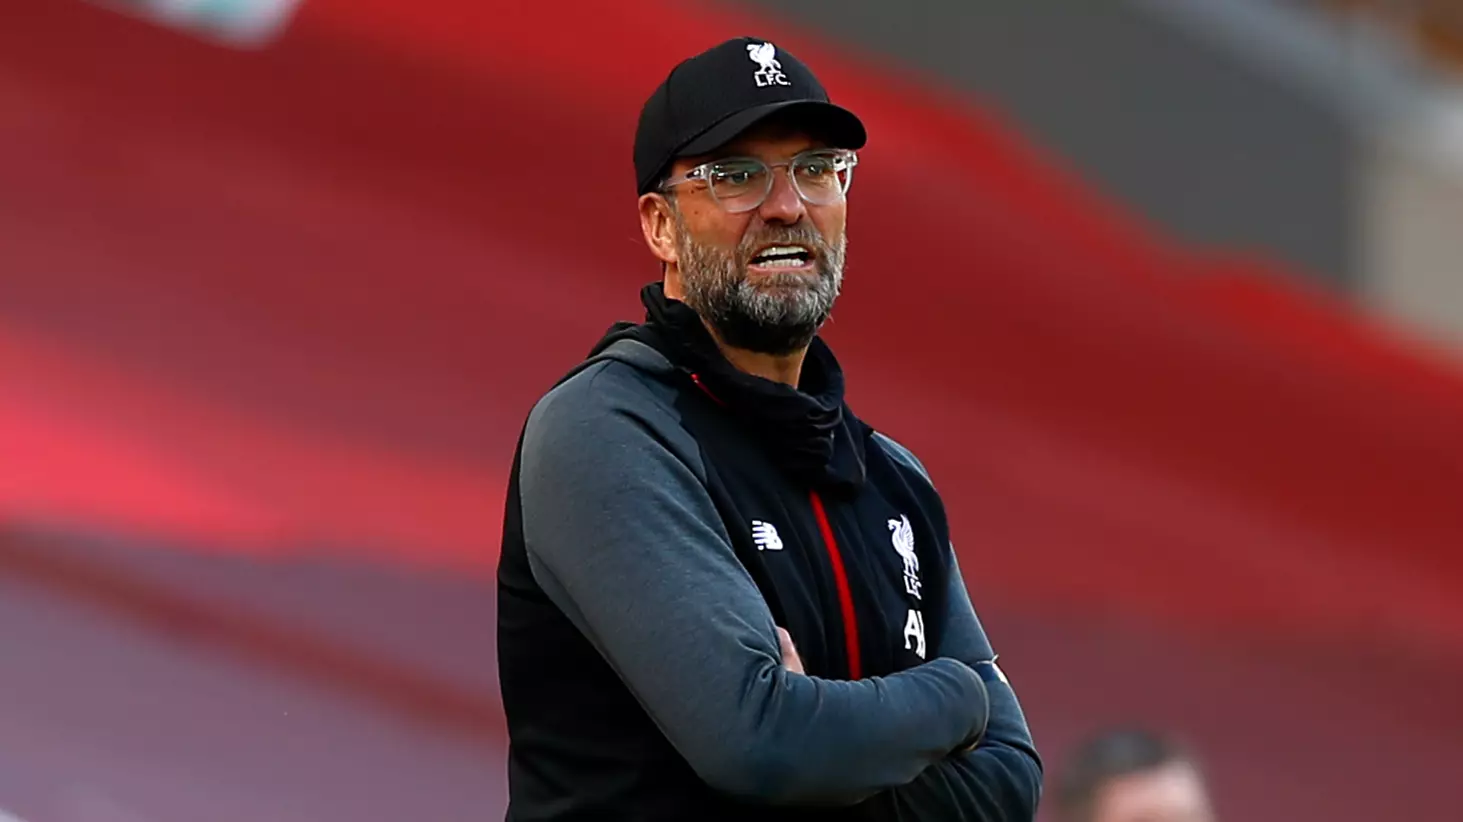 Jurgen Klopp 'Asks Liverpool For Two Signings' To Strengthen Squad For Next Season